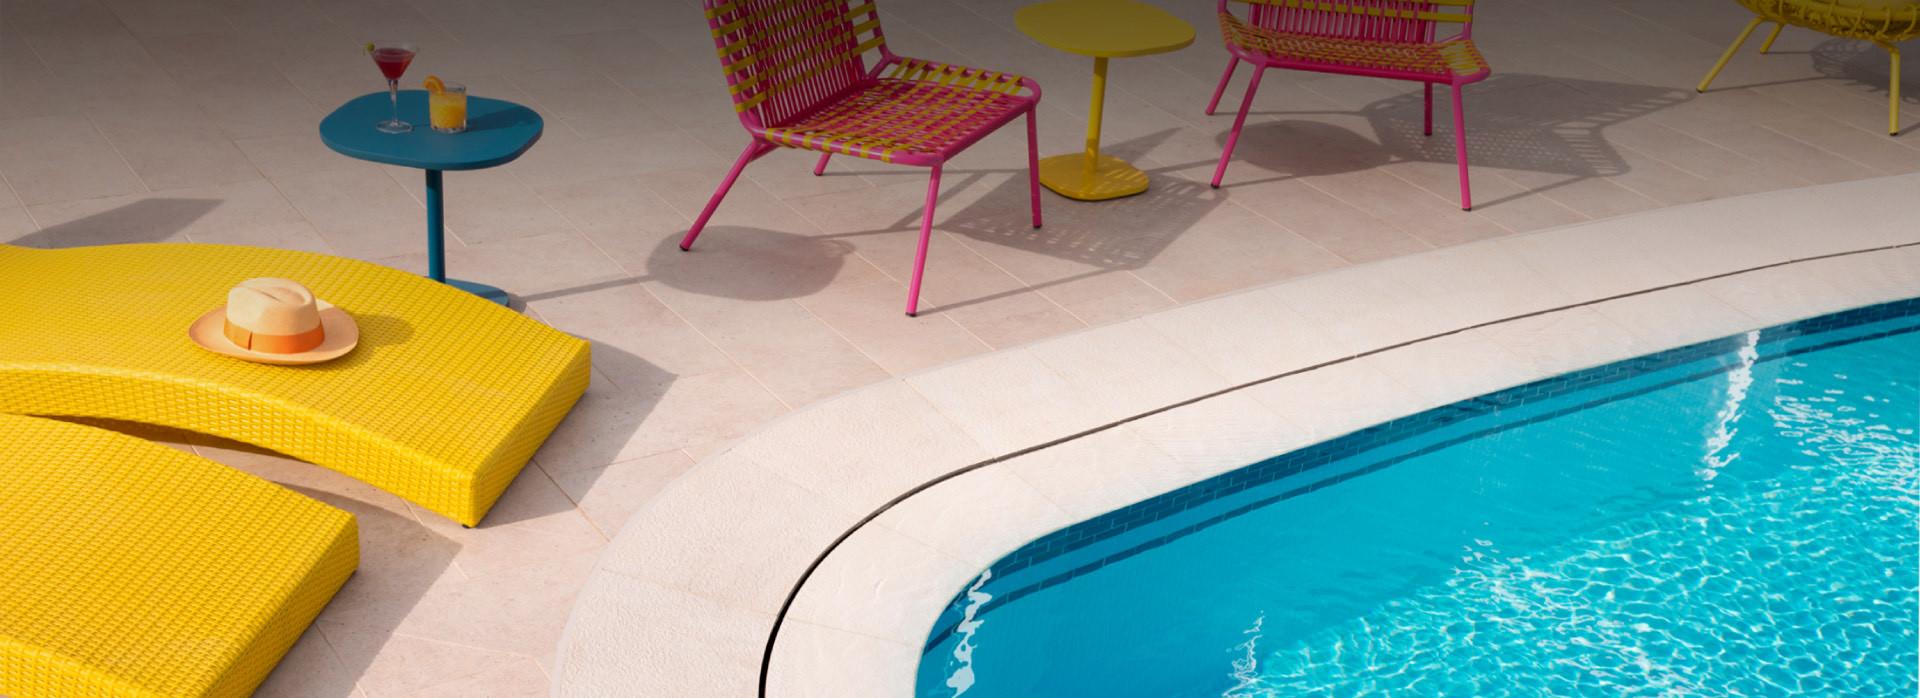 lake nona wave hotel pool with yellow and pink chairs